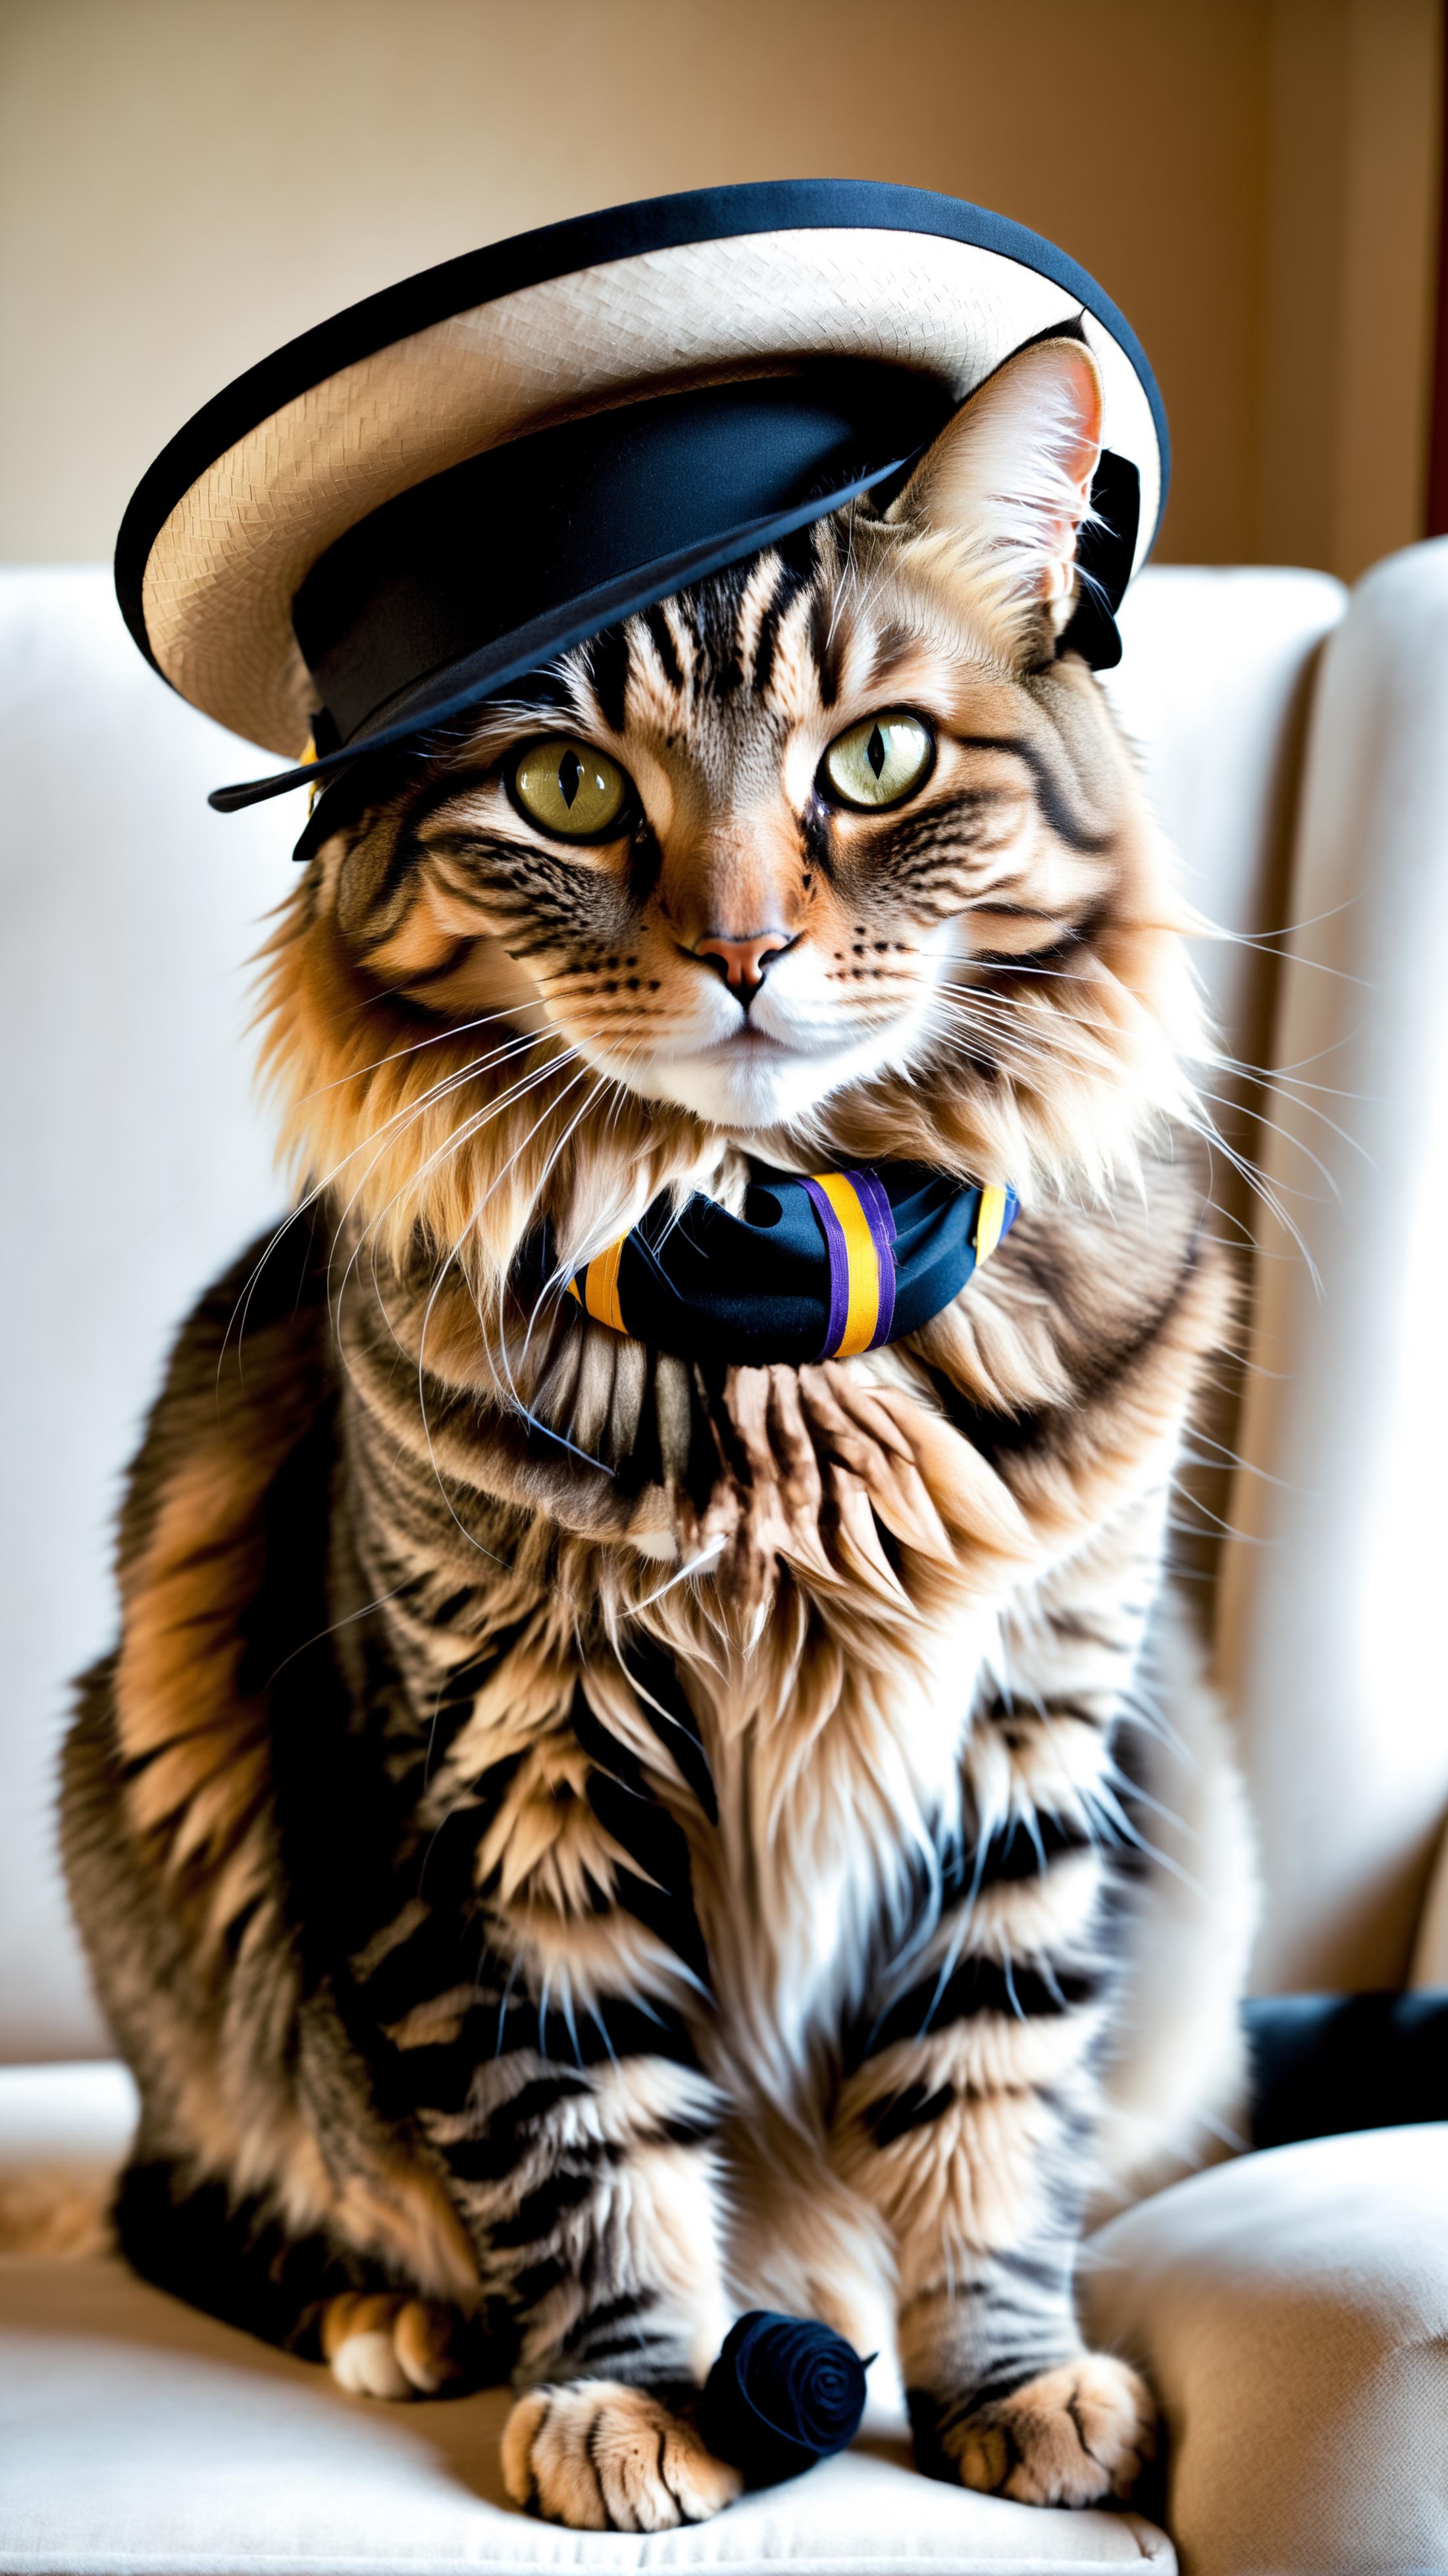 A fluffy, striped cat wearing a tie and hat.